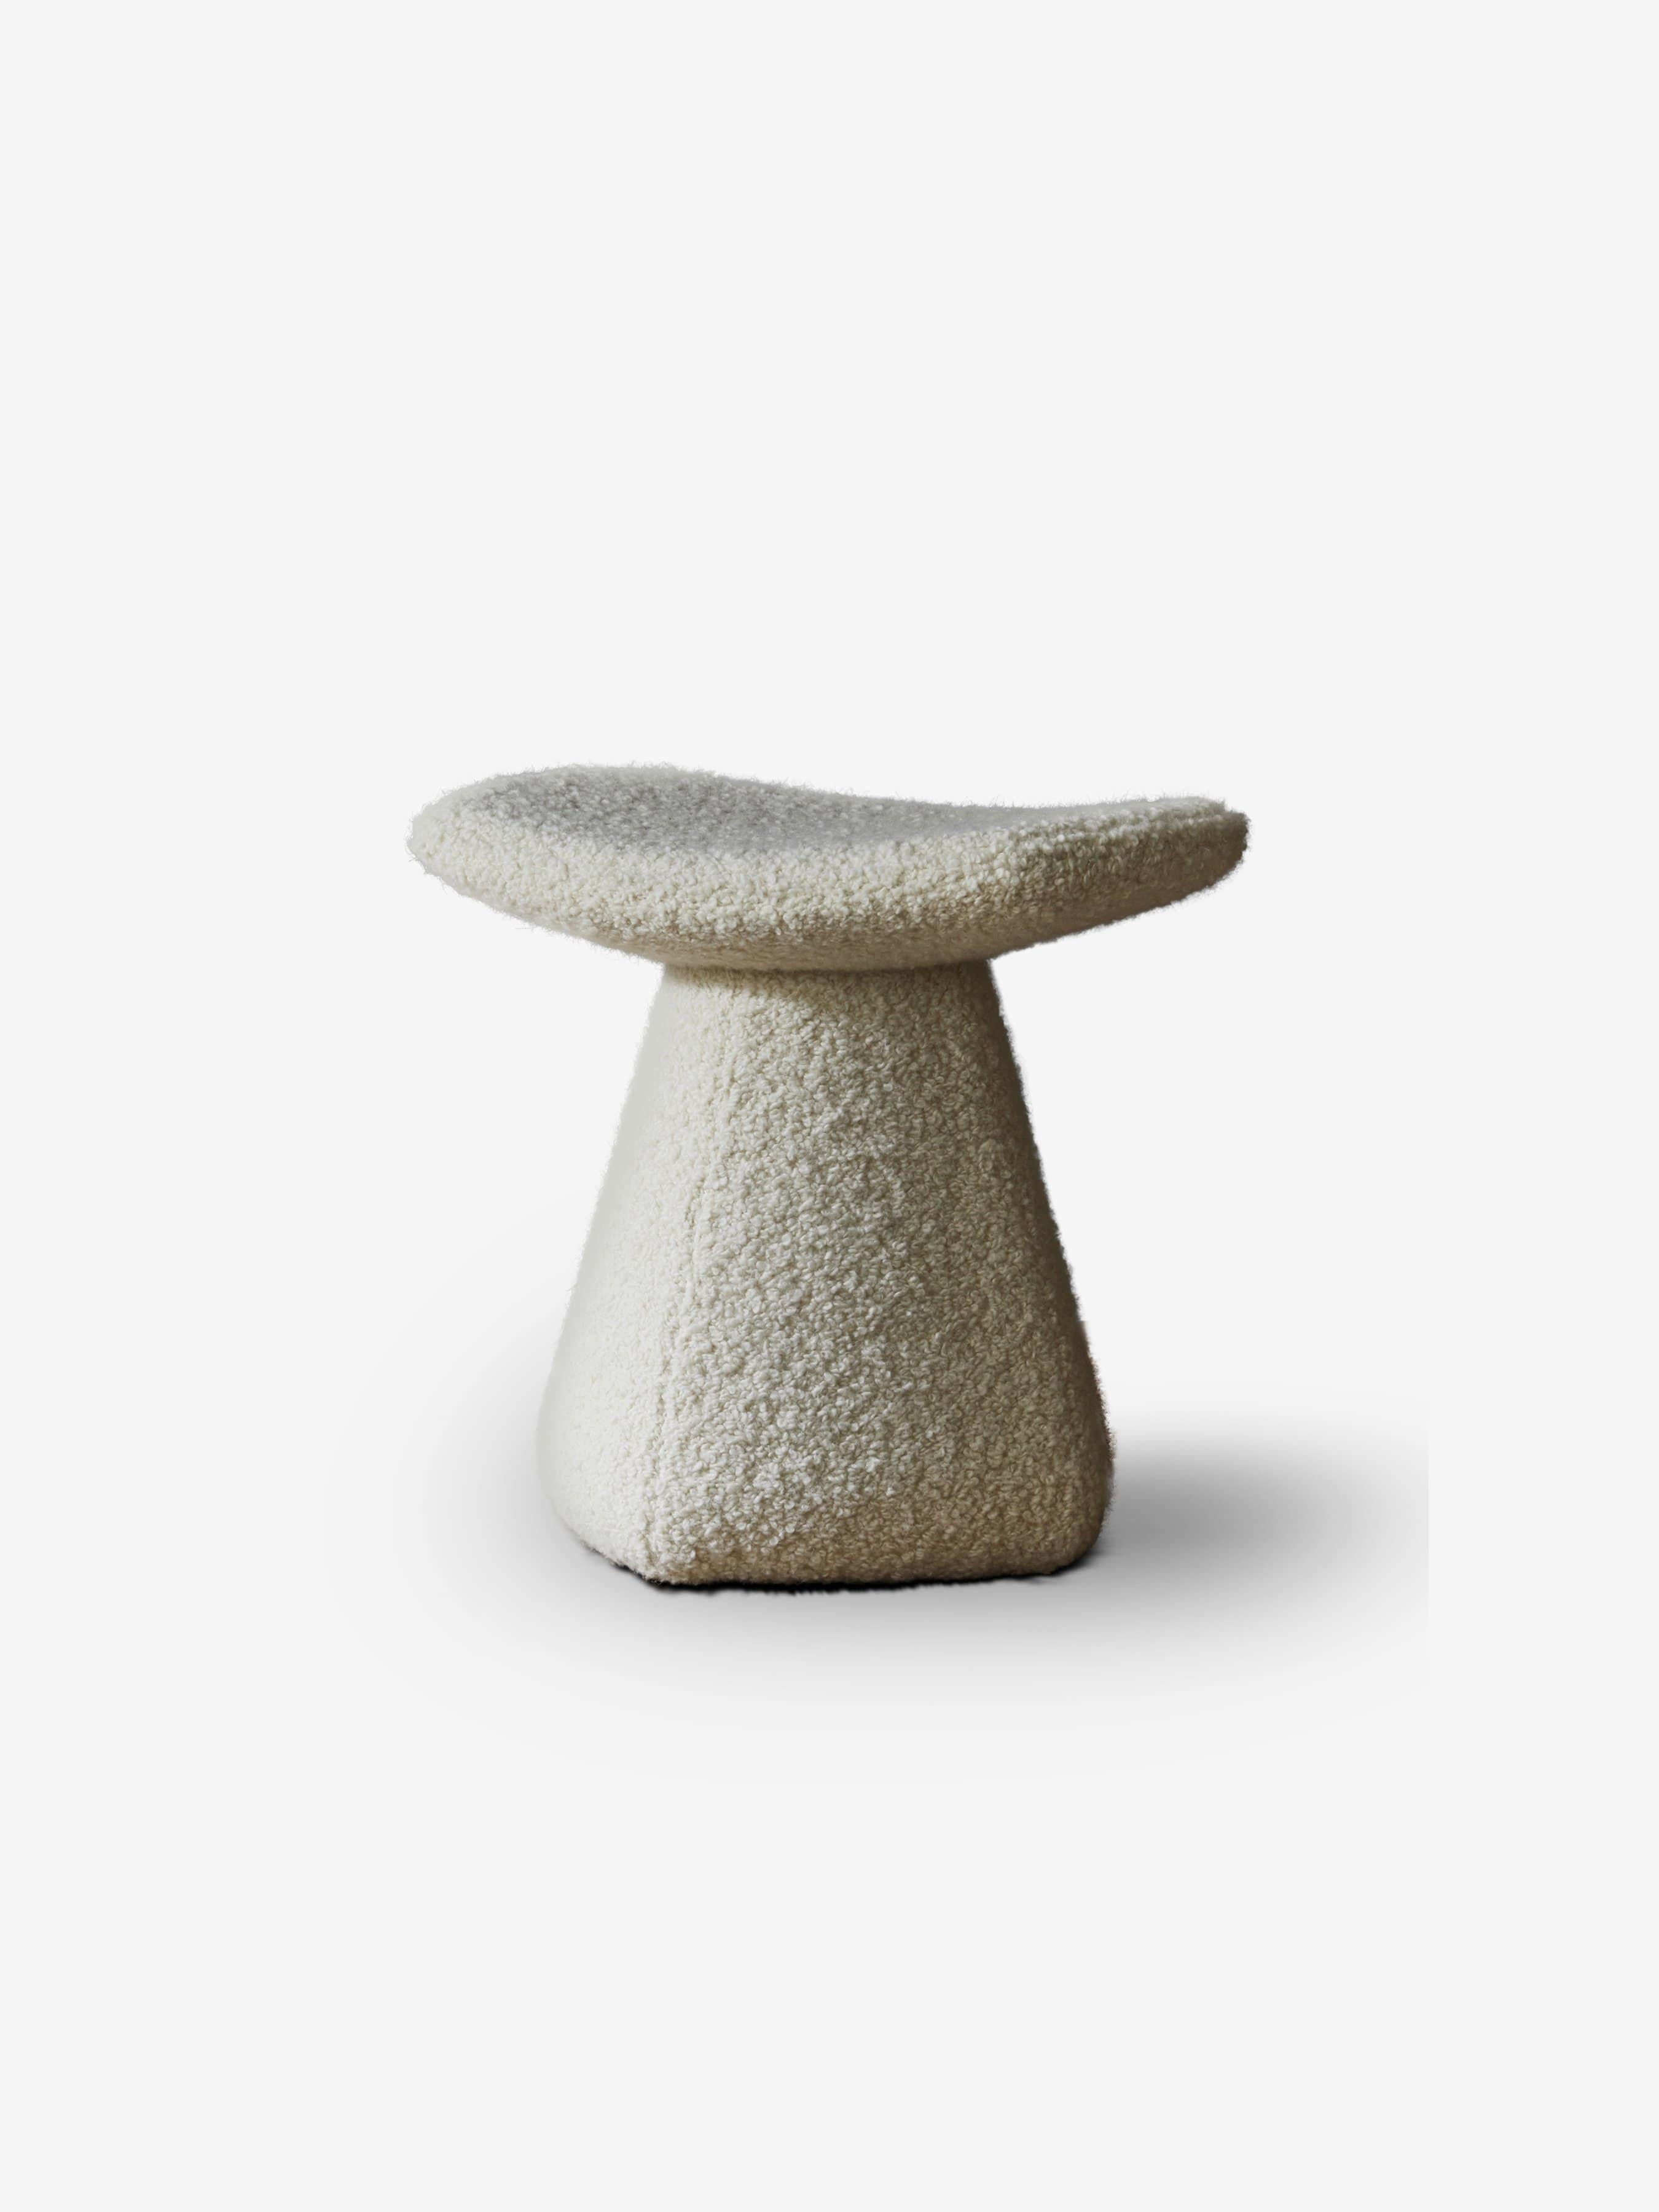 Dam Stool Upholstered by Christophe Delcourt for Collection Particuliere For Sale 2